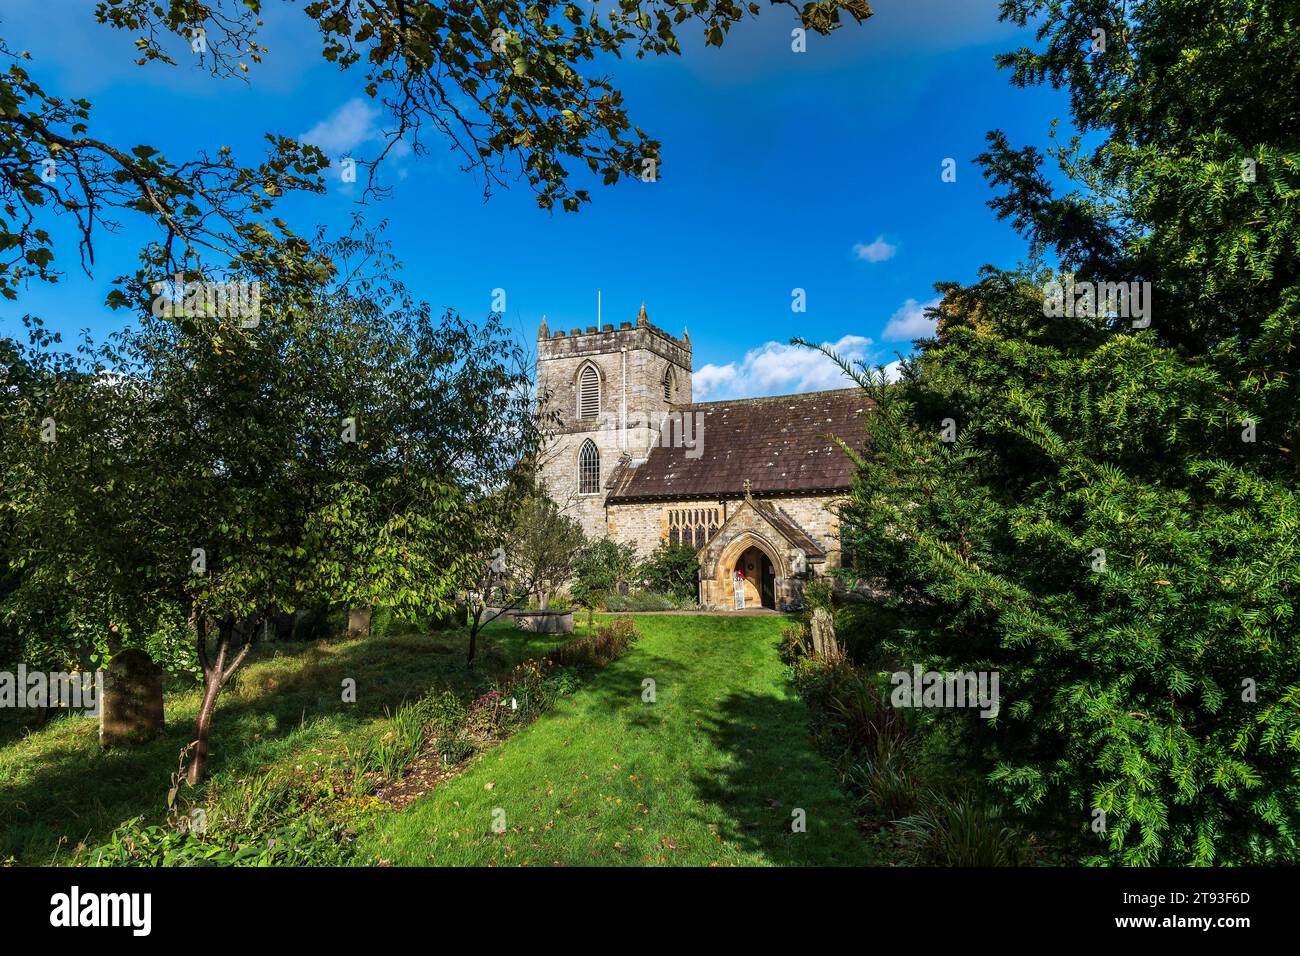 St. Mary's Church in Kettlewell  a village in Upper Wharfedale, North Yorkshire, England. Historically part of the West Riding of Yorkshire, a beautif Stock Photo